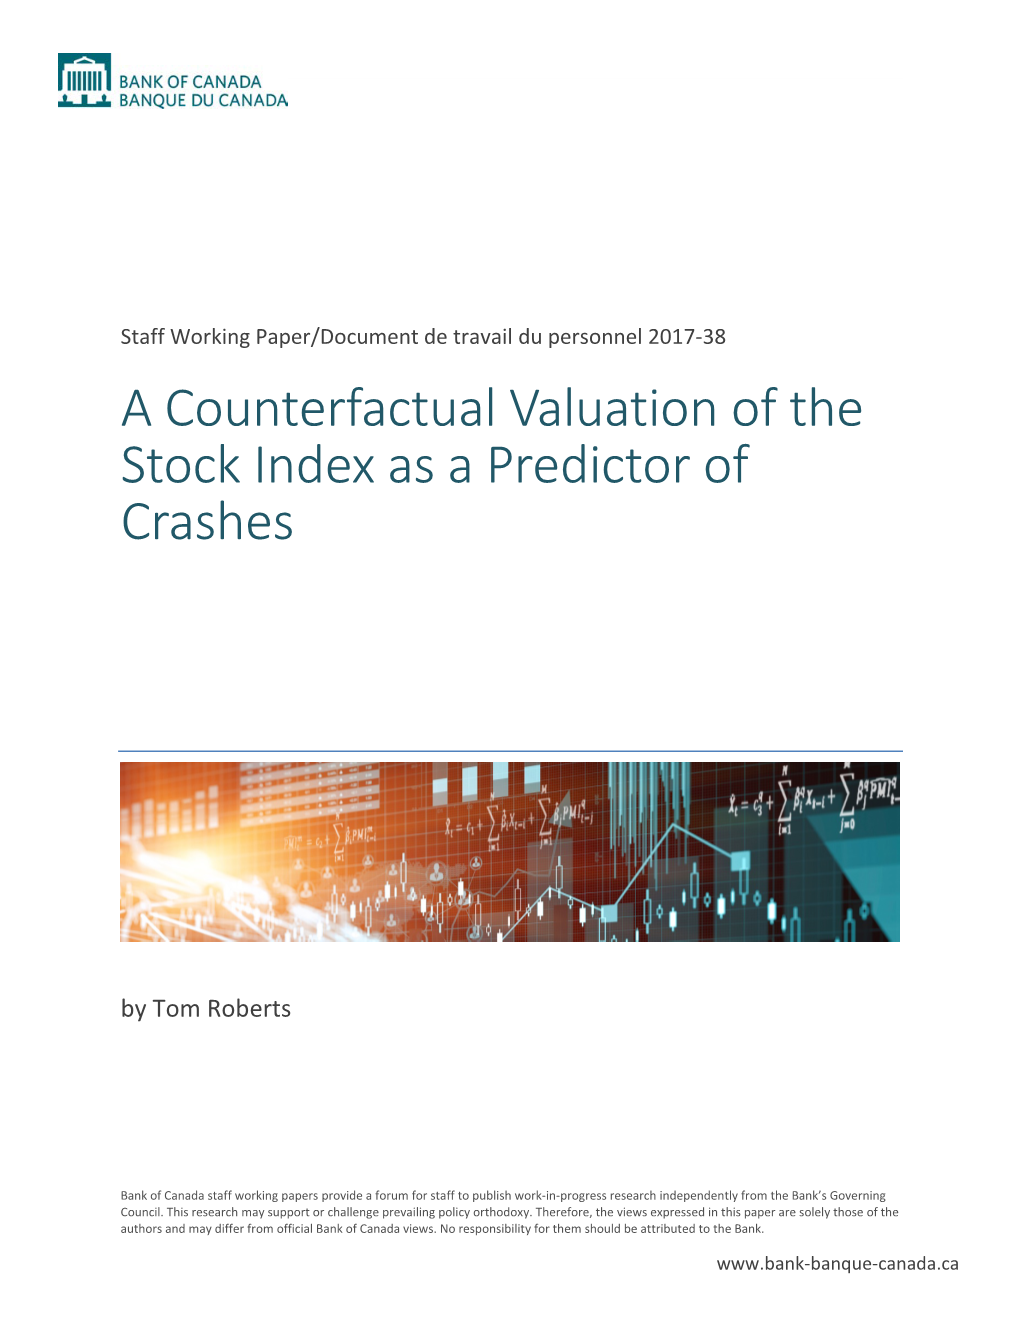 A Counterfactual Valuation of the Stock Index As a Predictor of Crashes